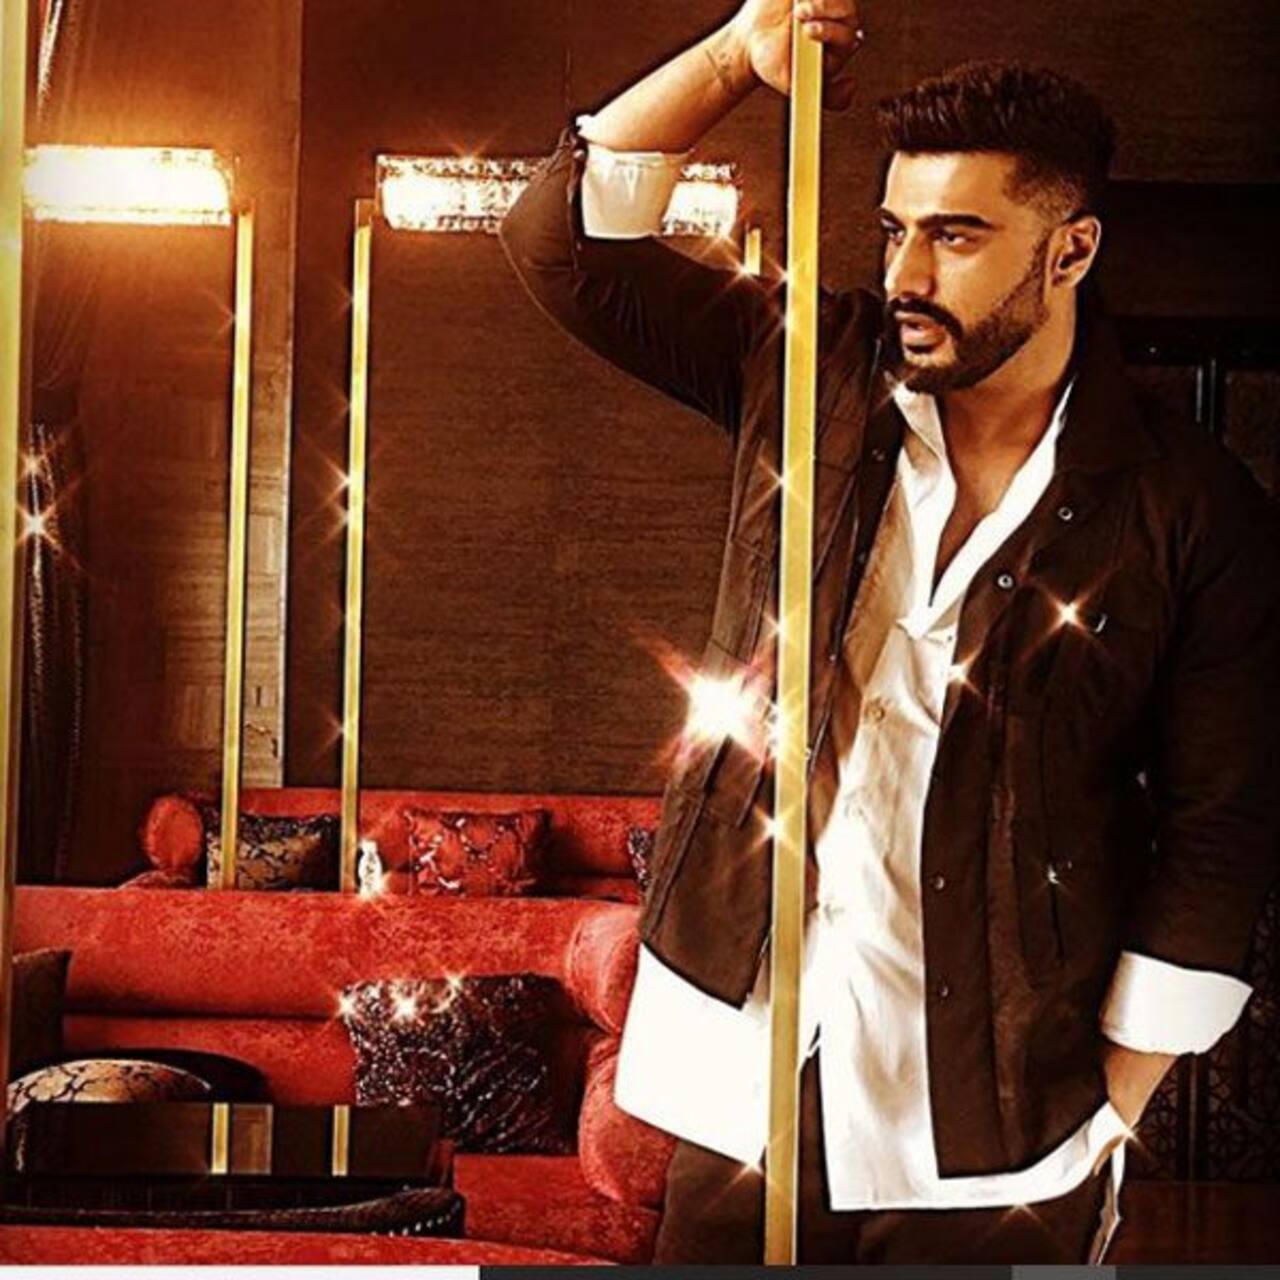 EXCLUSIVE! Arjun Kapoor reveals what went behind the making of India's Most Wanted - watch video